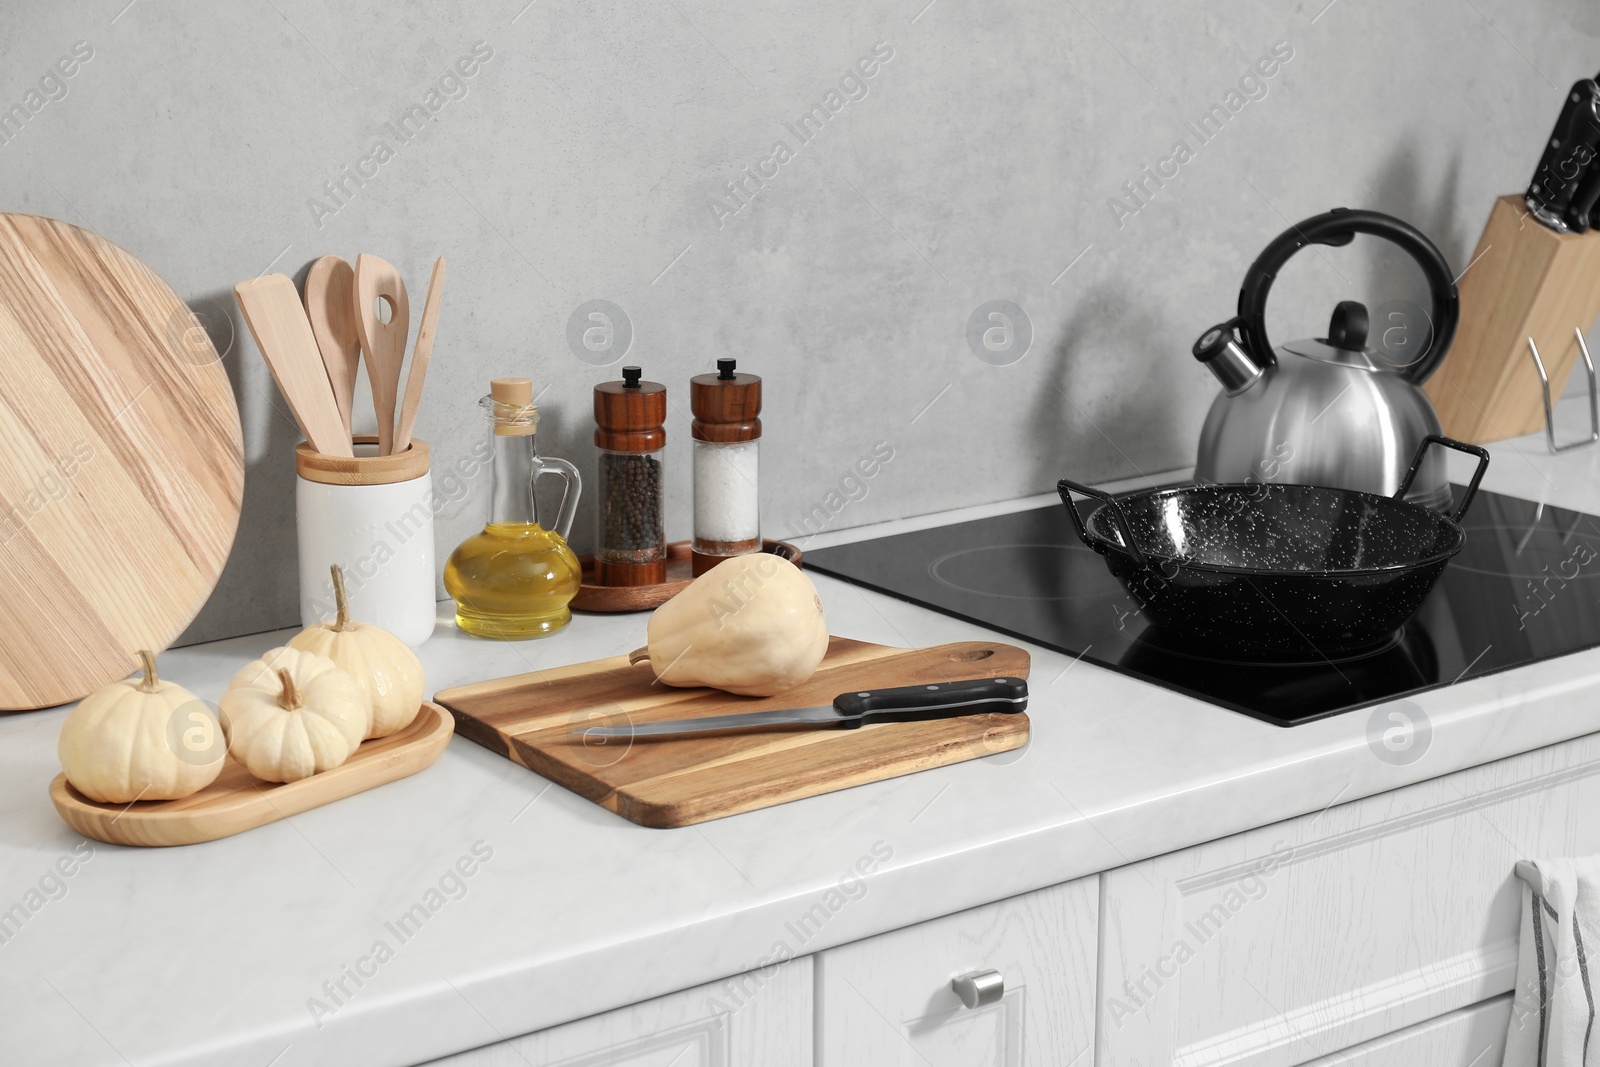 Photo of Wooden cutting boards, other cooking utensils and pumpkins on white countertop in kitchen